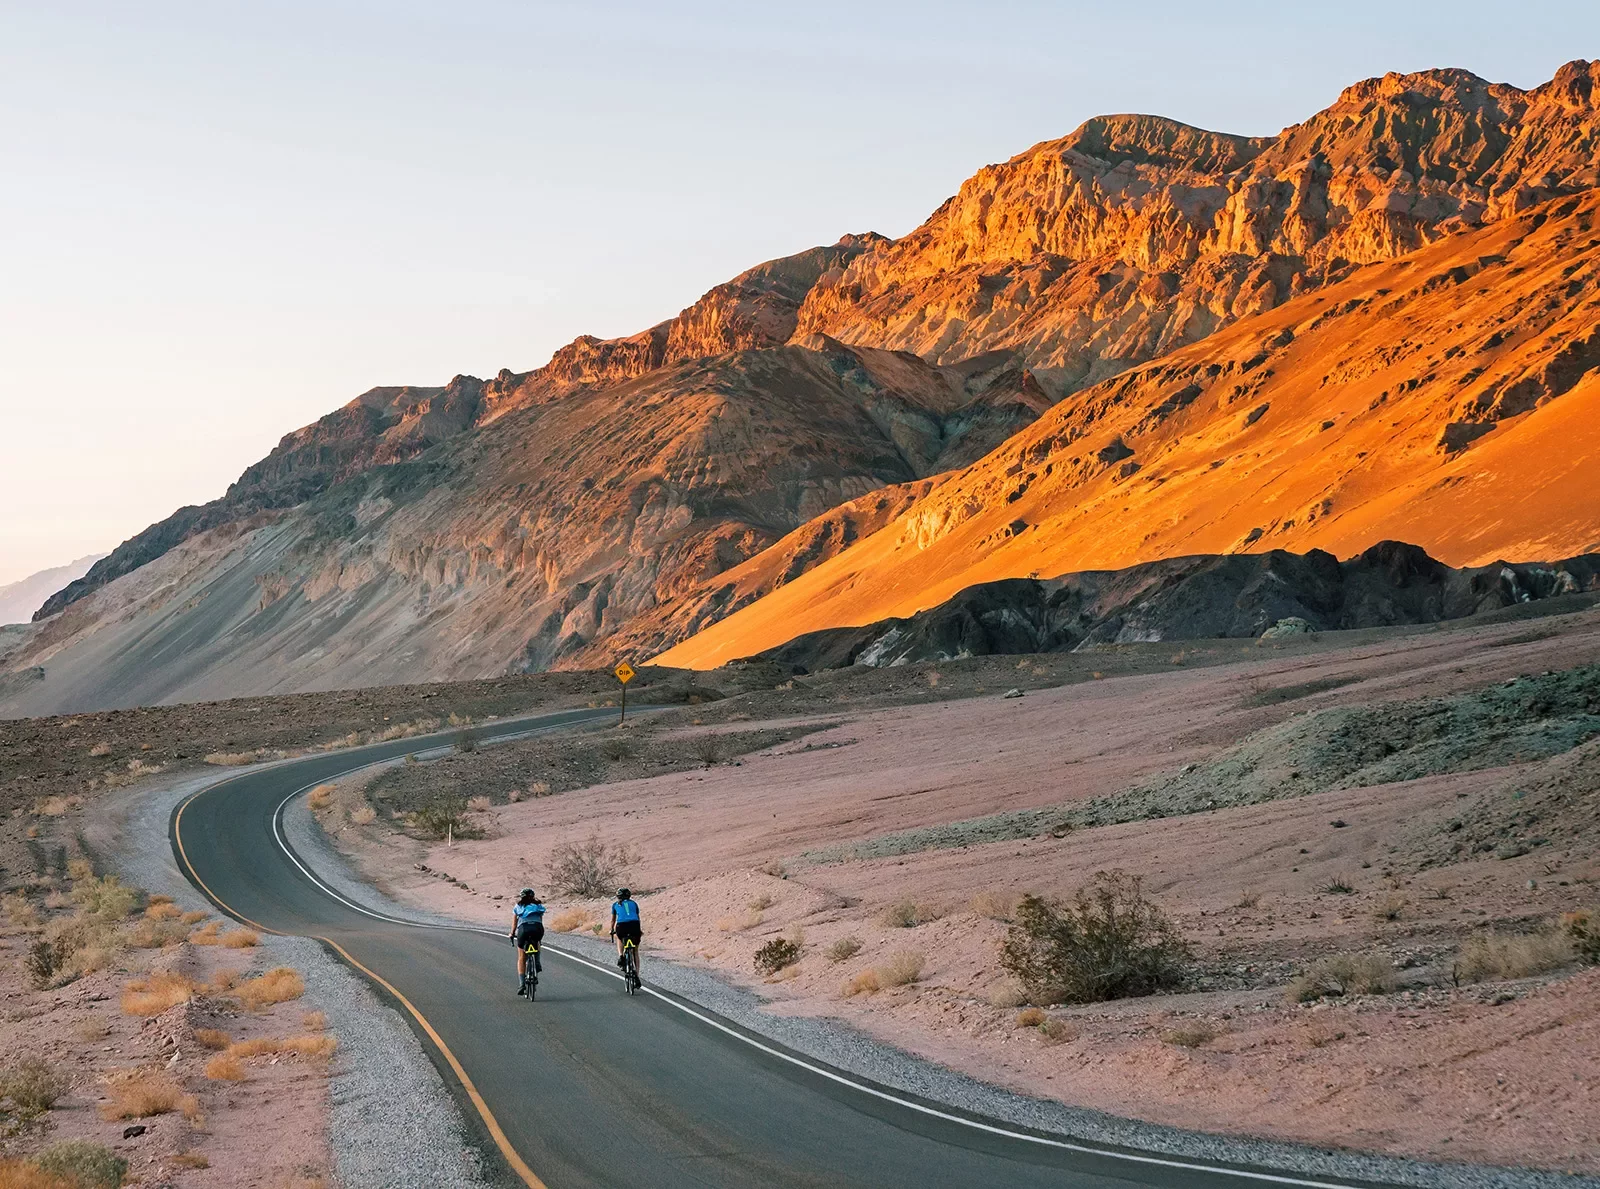 Guests riding down desert road during sunset.